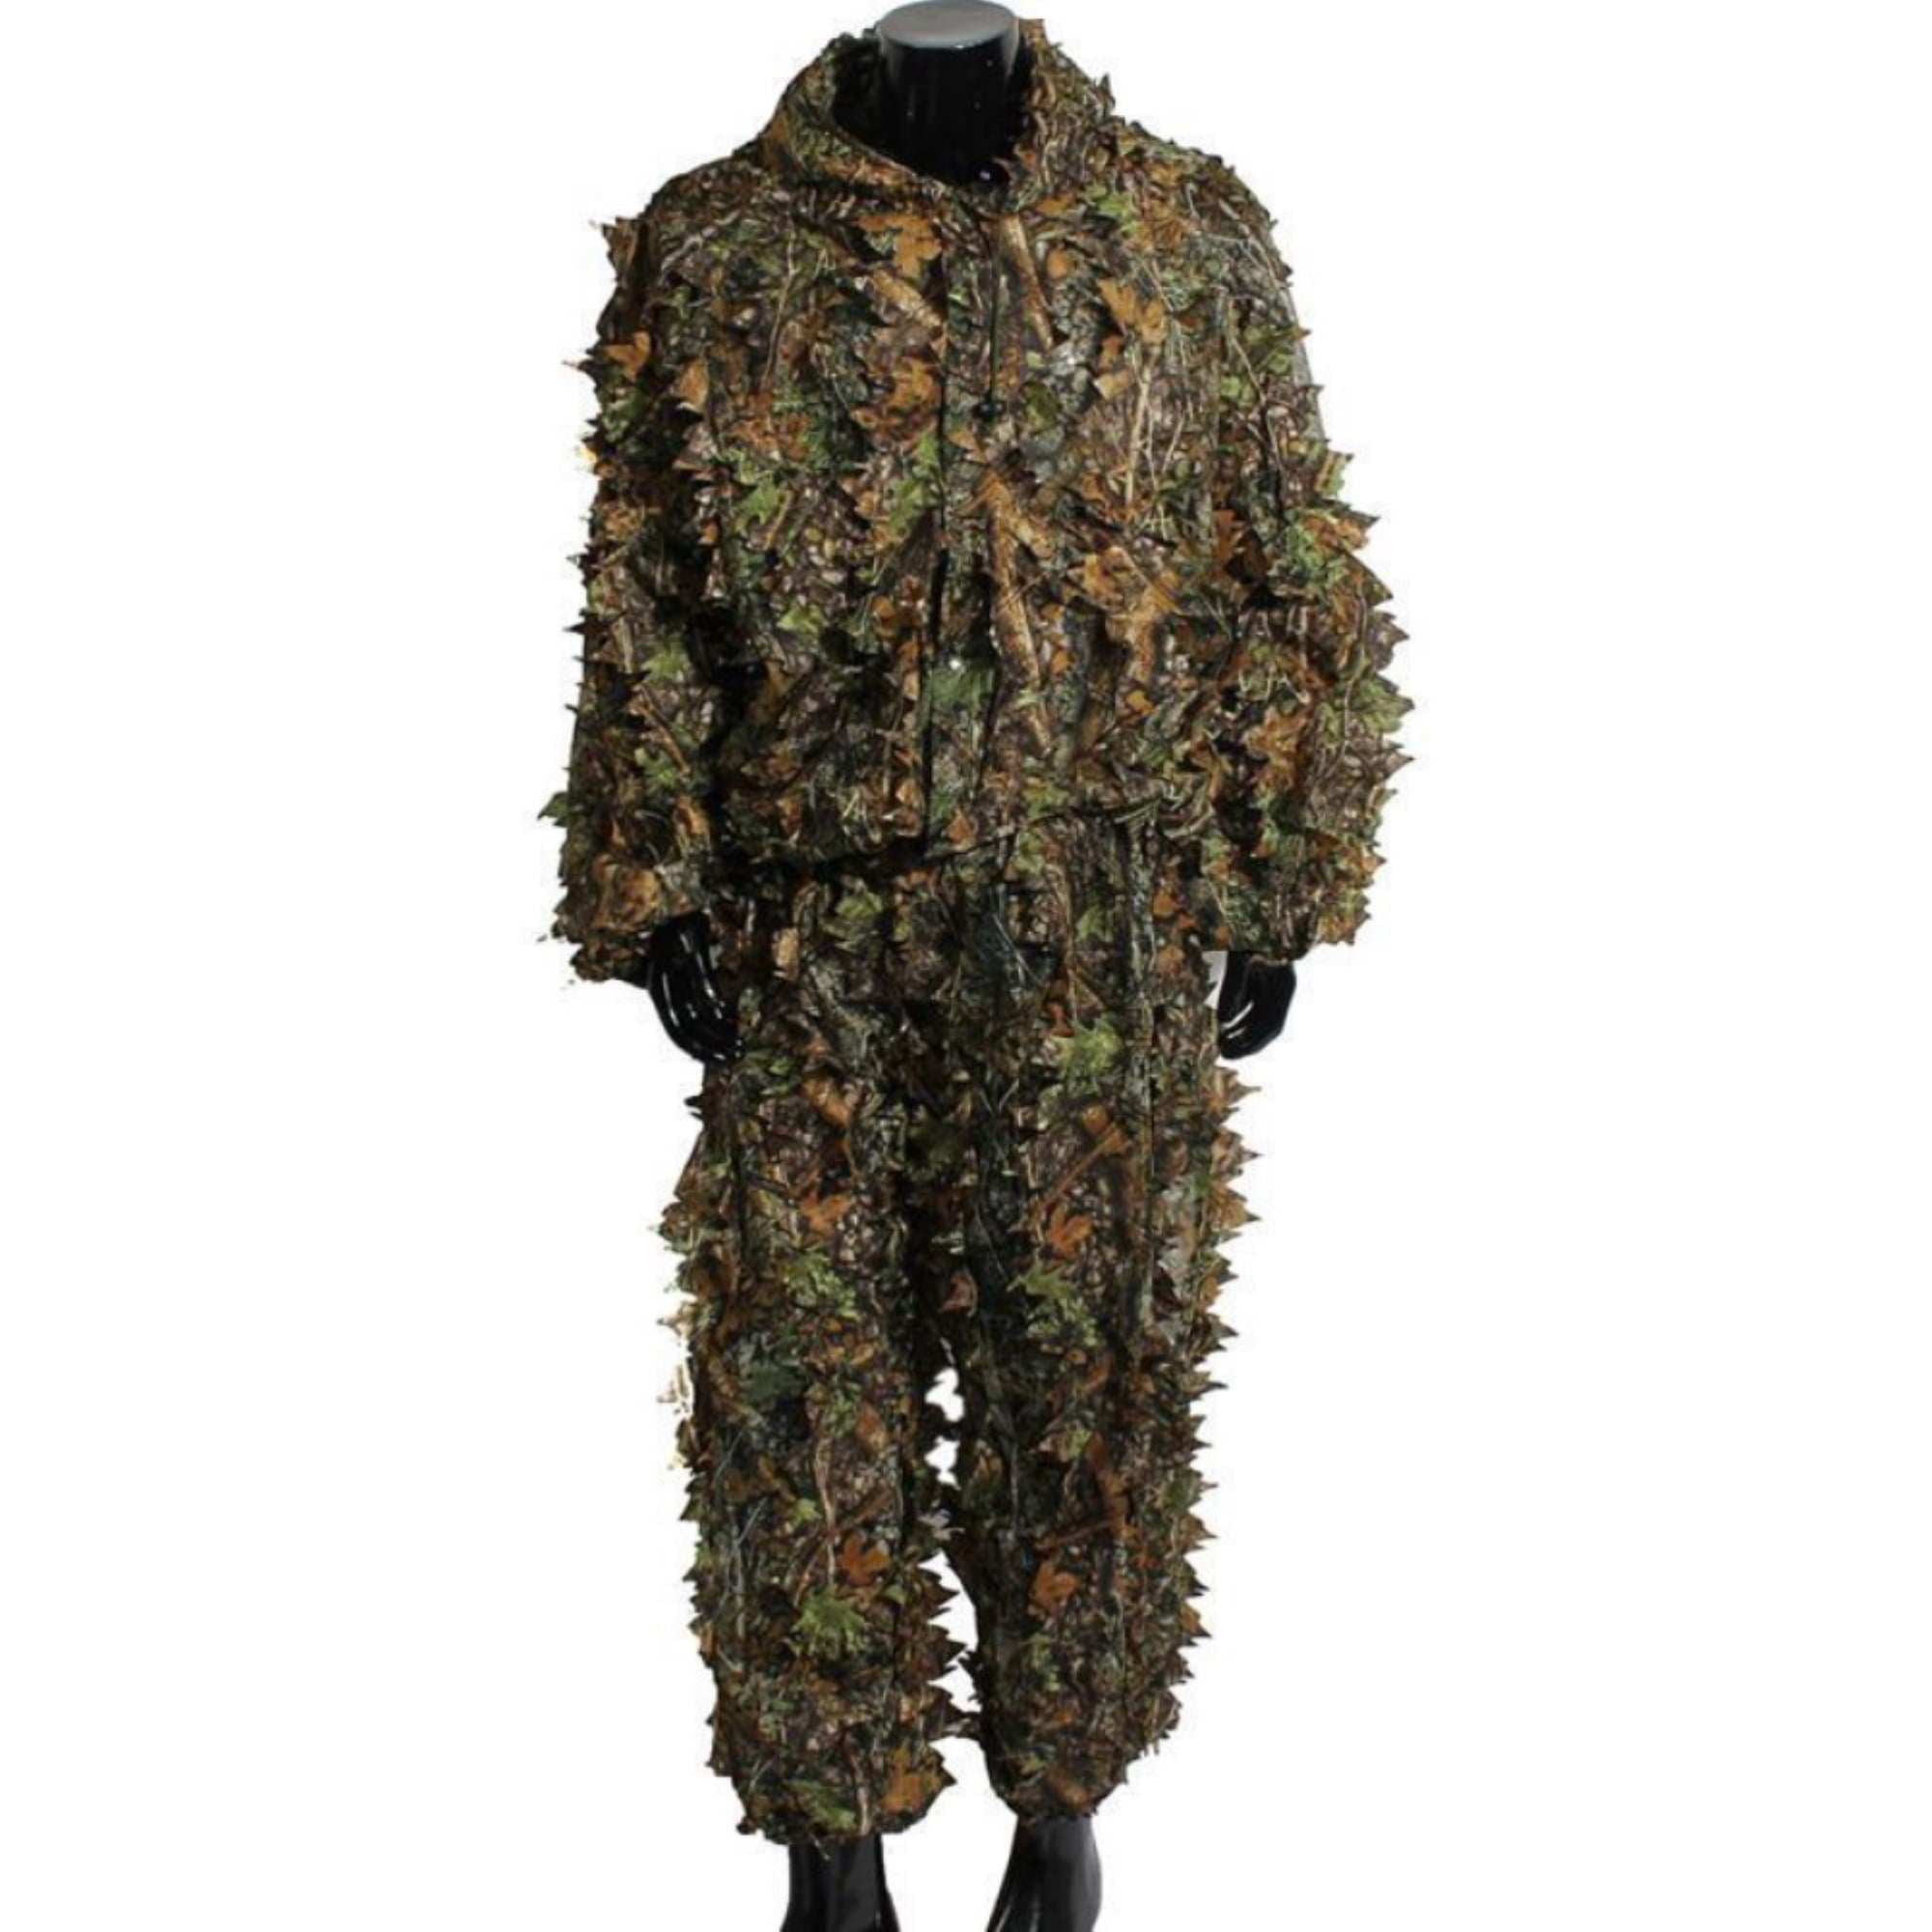 MENS JACKET JUNGLE PRINT COMBAT HUNTING COAT CAMOUFLAGE TREE FOREST HOODED TOP 